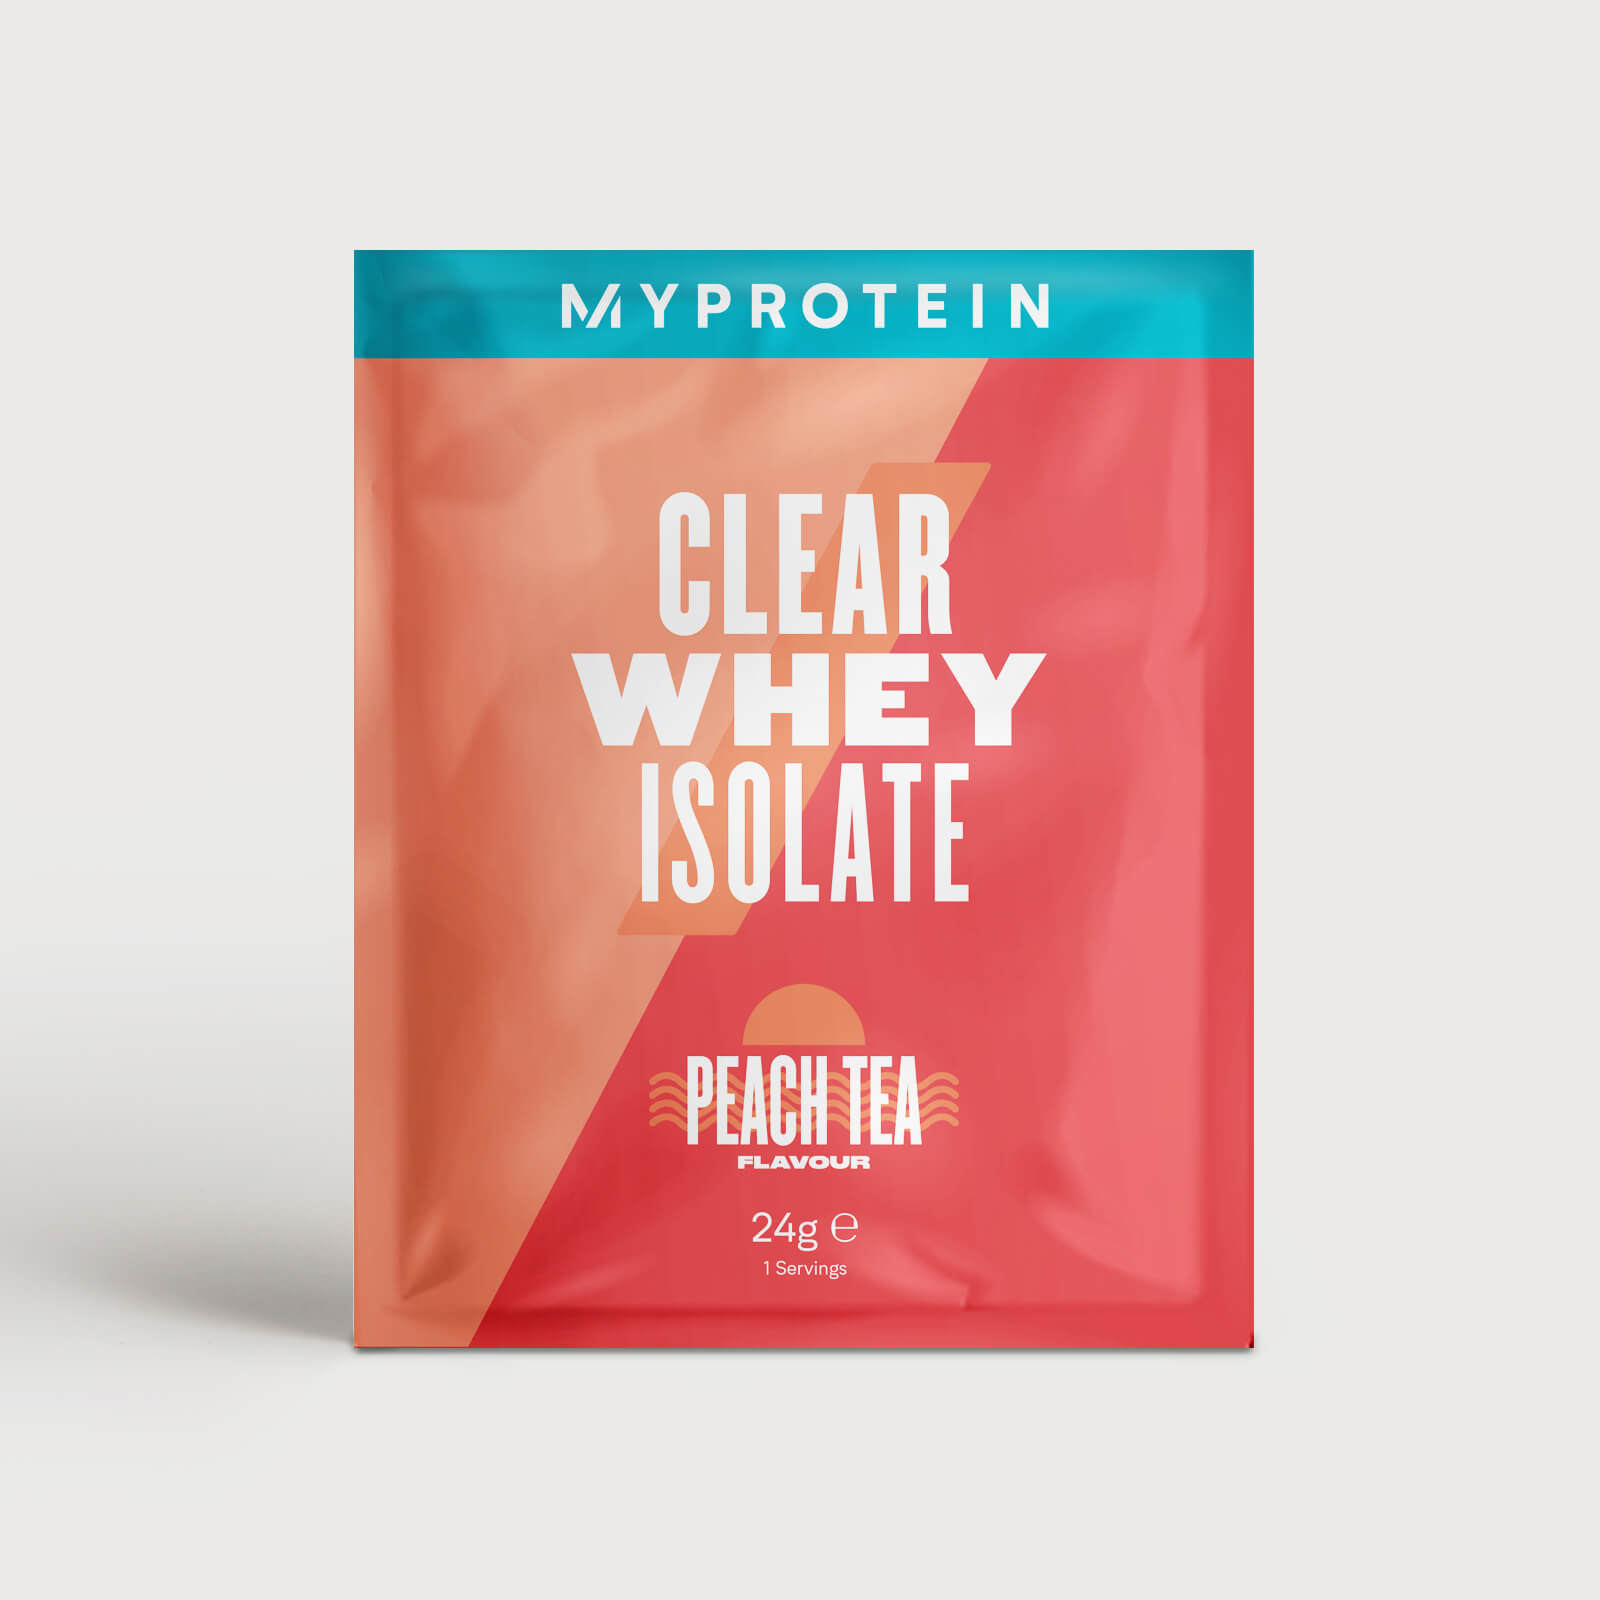 Myprotein Clear Whey Isolate (Sample) - 1servings - Chá de Pêssego